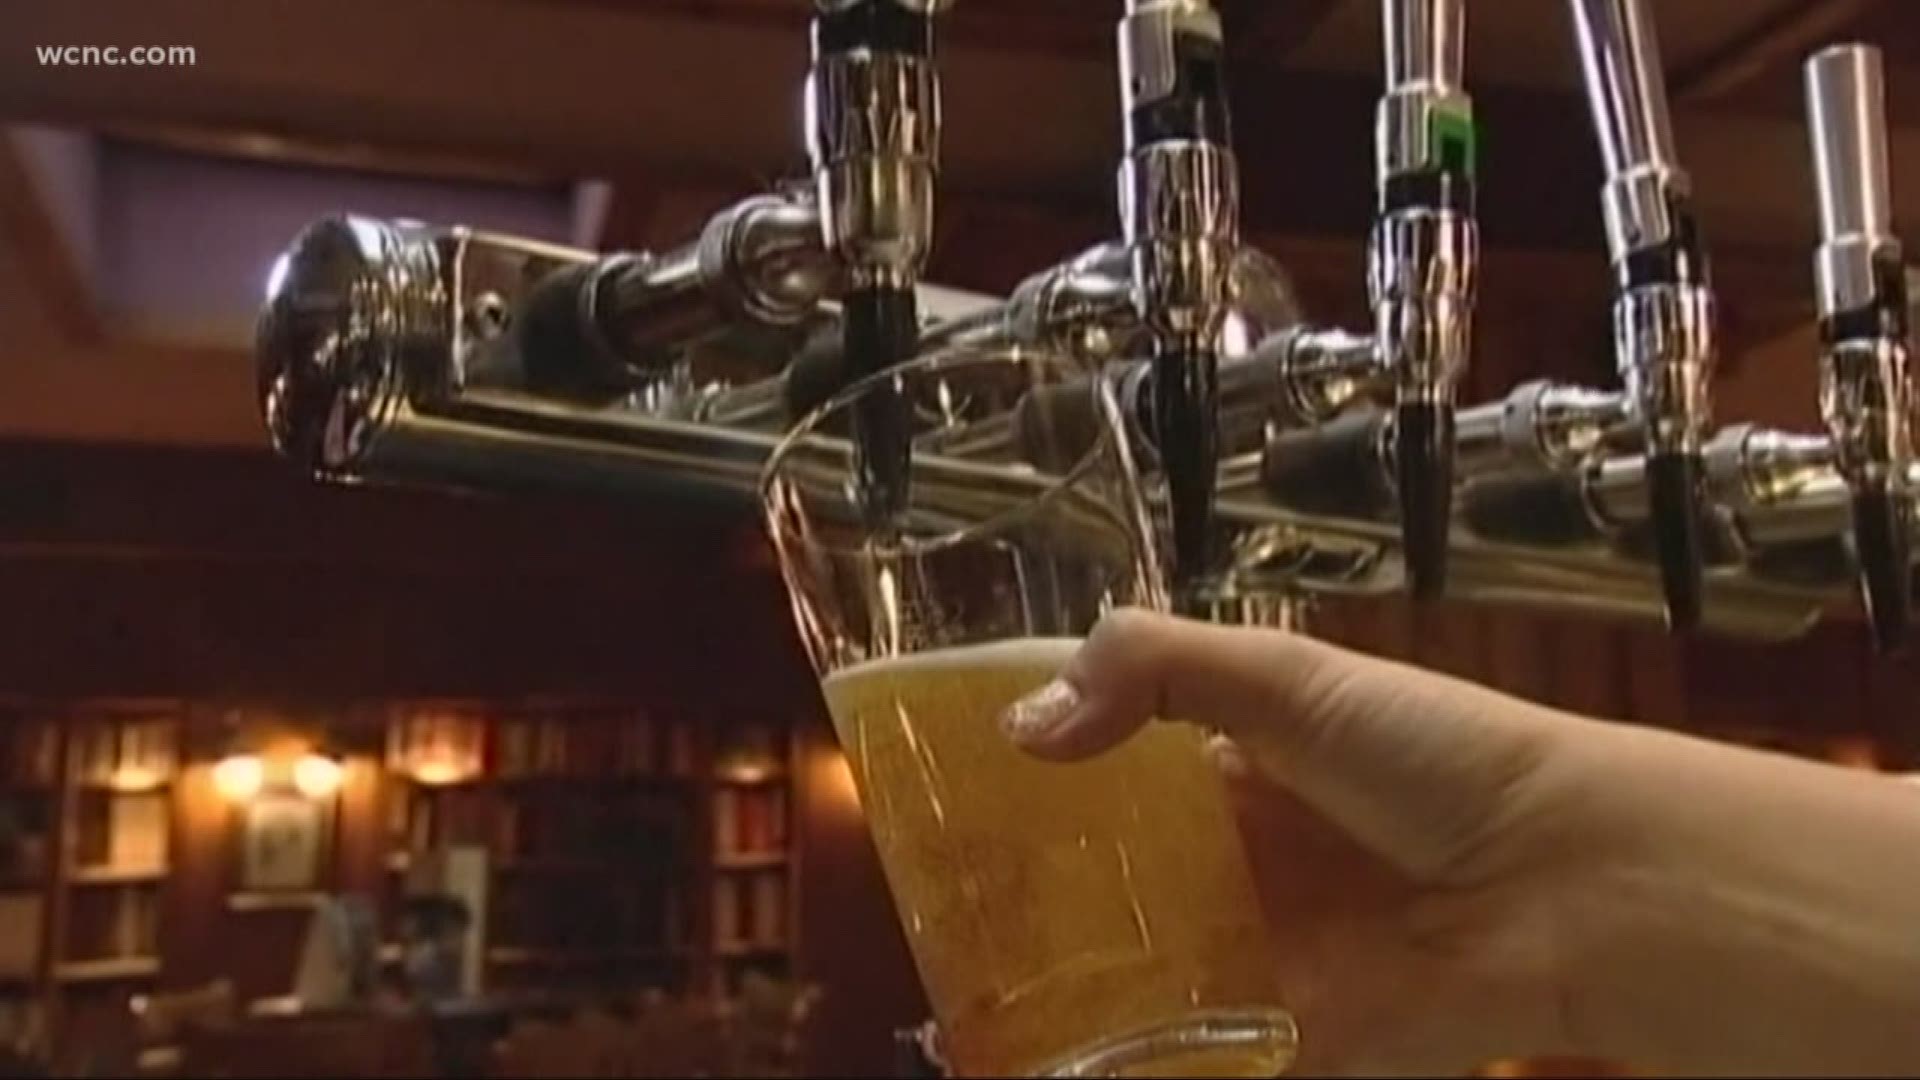 This weekend, you can sample beers from 39 different breweries and cideries all at one location at the Queen City Brewers Festival. The event helps local families affected by autism.